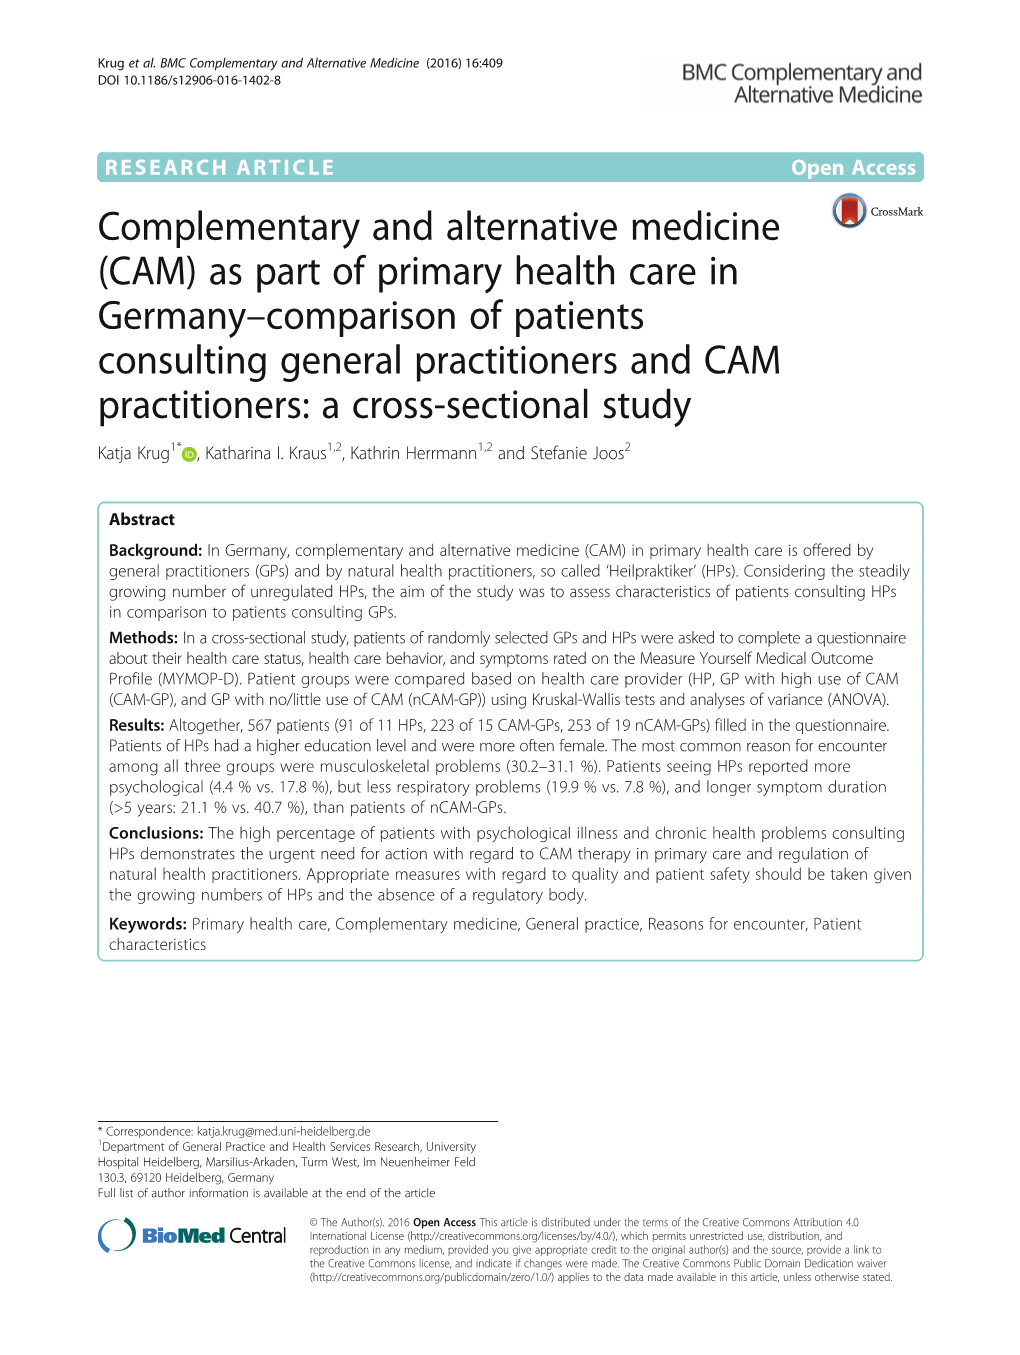 Complementary and Alternative Medicine (CAM) As Part of Primary